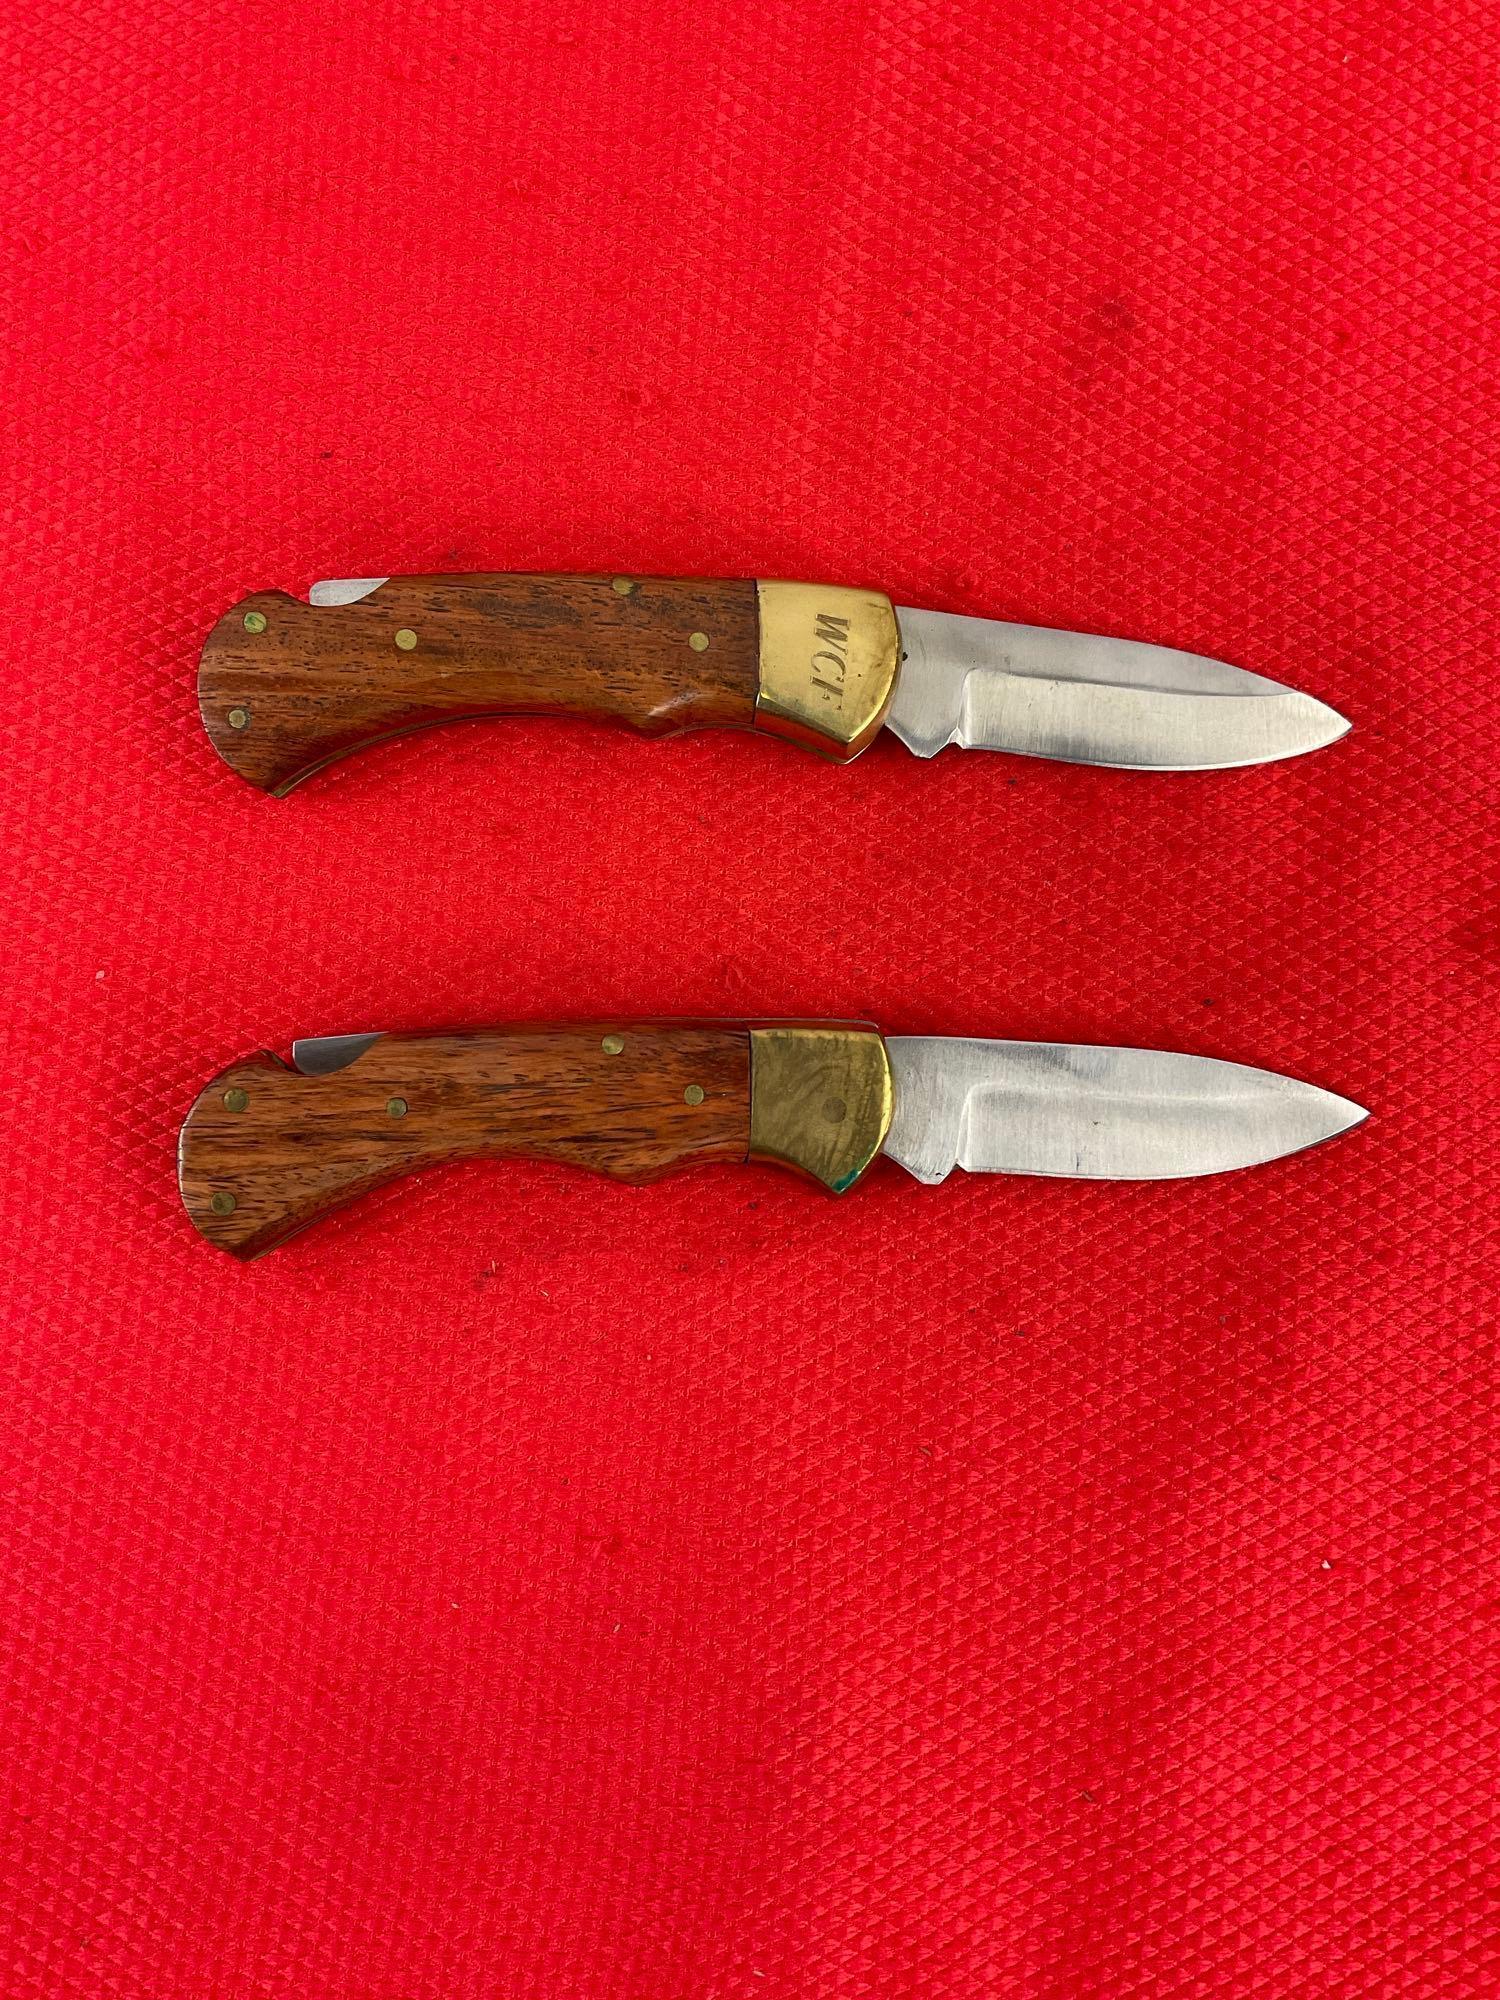 2x Unknown Maker 2.5" Stainless Steel Folding Blade Pocket Knives w/ Sheathes. No Hallmarks. See